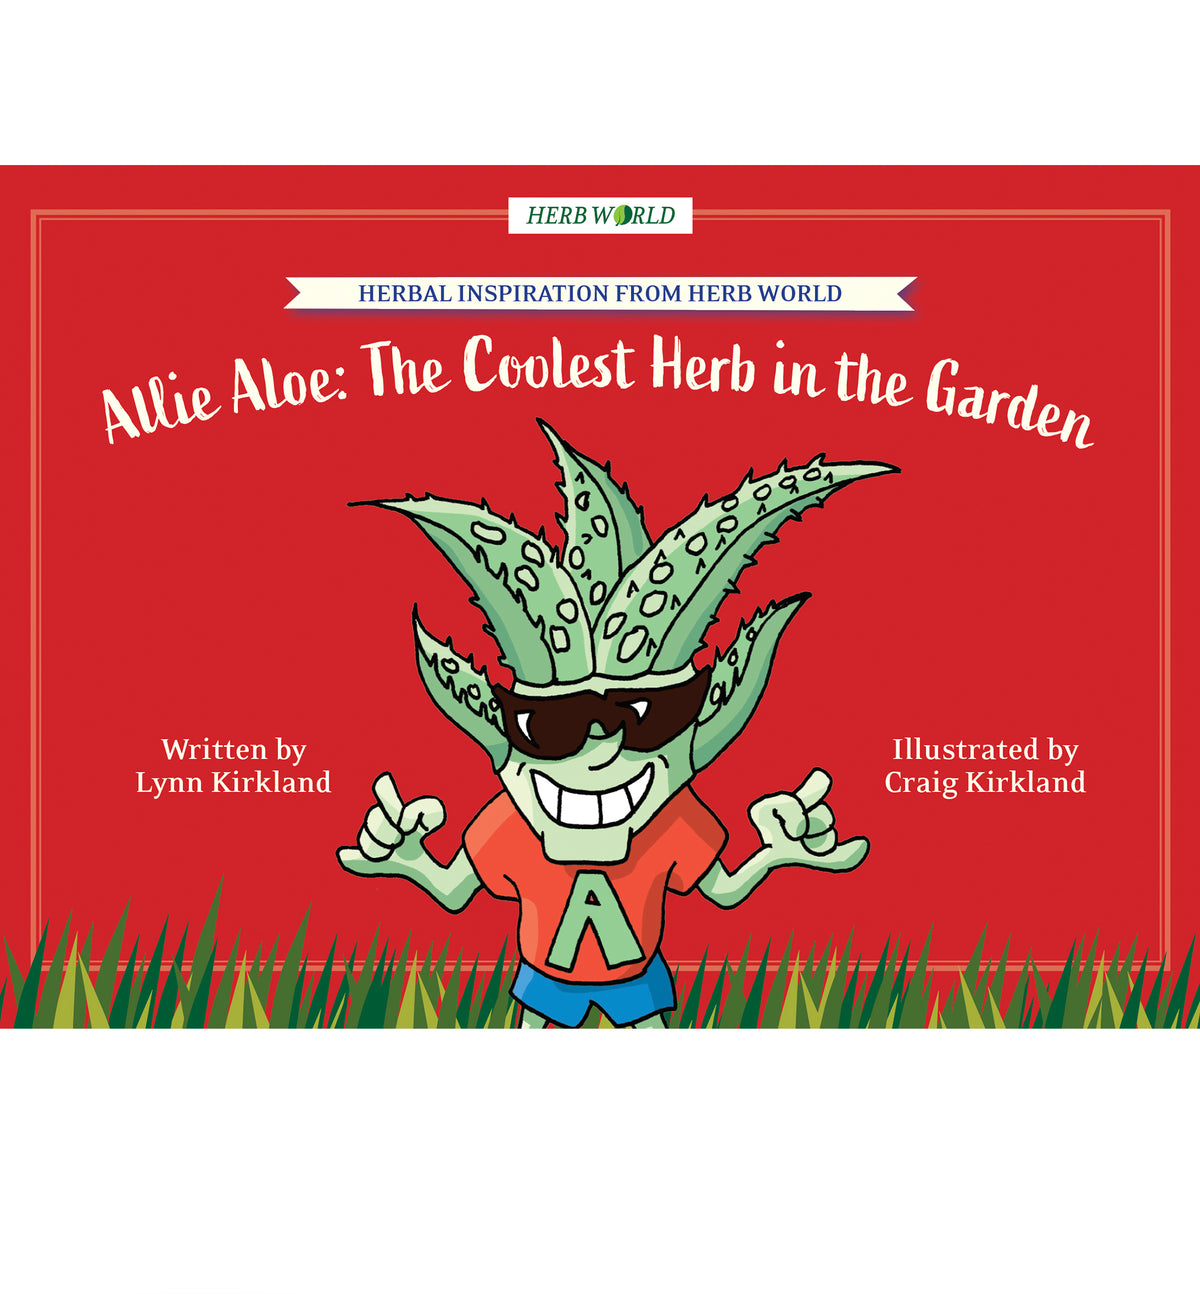 Herb World - Allie Aloe: The Coolest Herb in the Garden Book primary